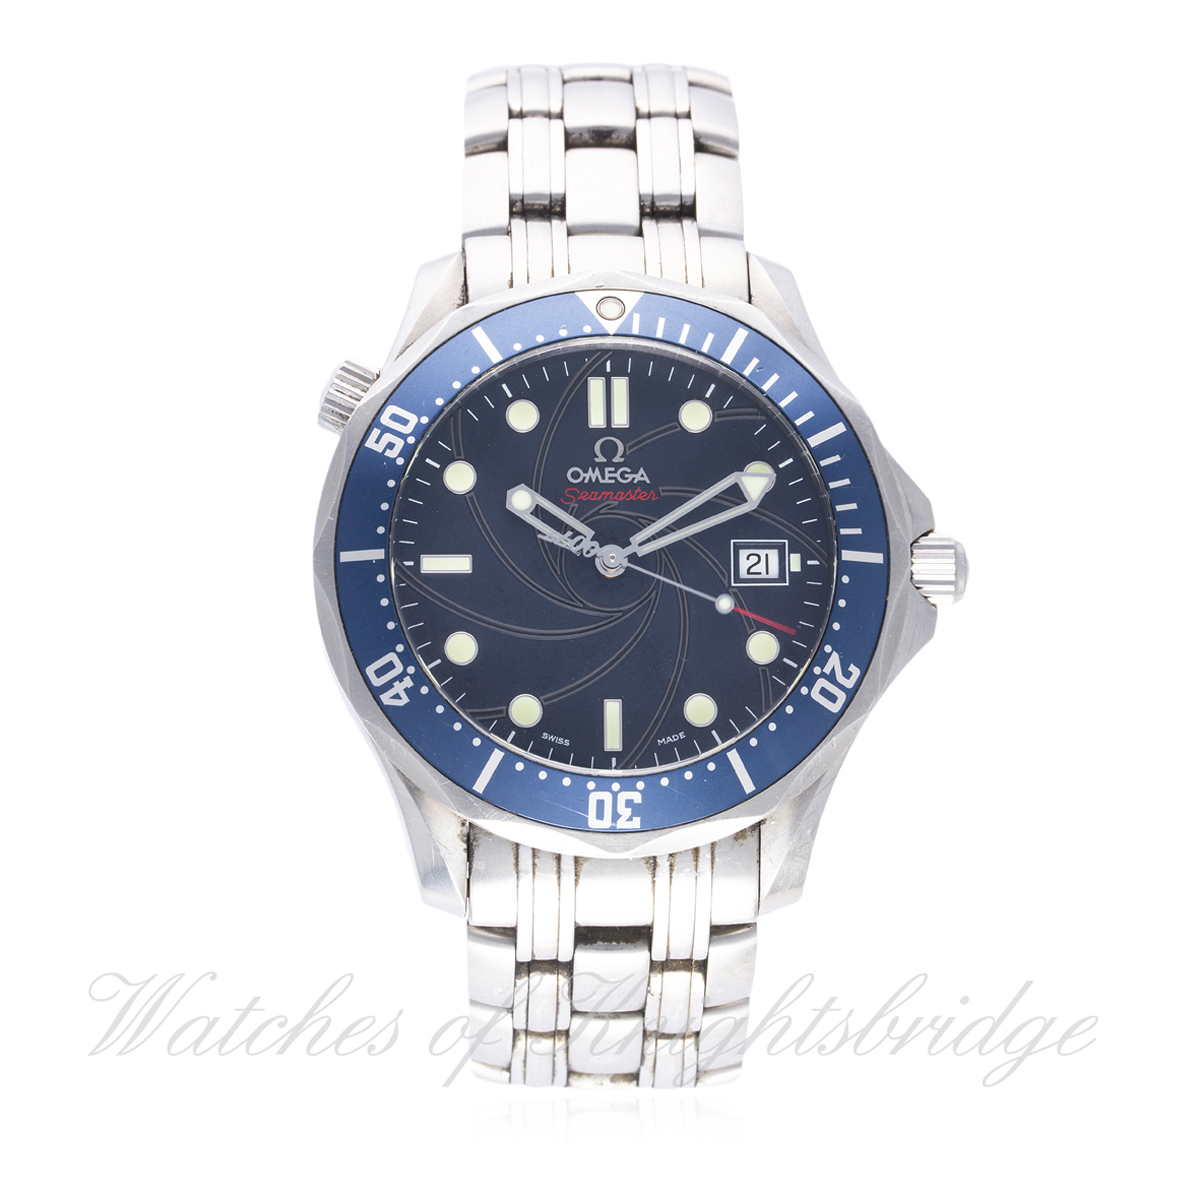 A GENTLEMAN'S STAINLESS STEEL OMEGA SEAMASTER PROFESSIONAL 300M BRACELET WATCH DATED 2006, JAMES